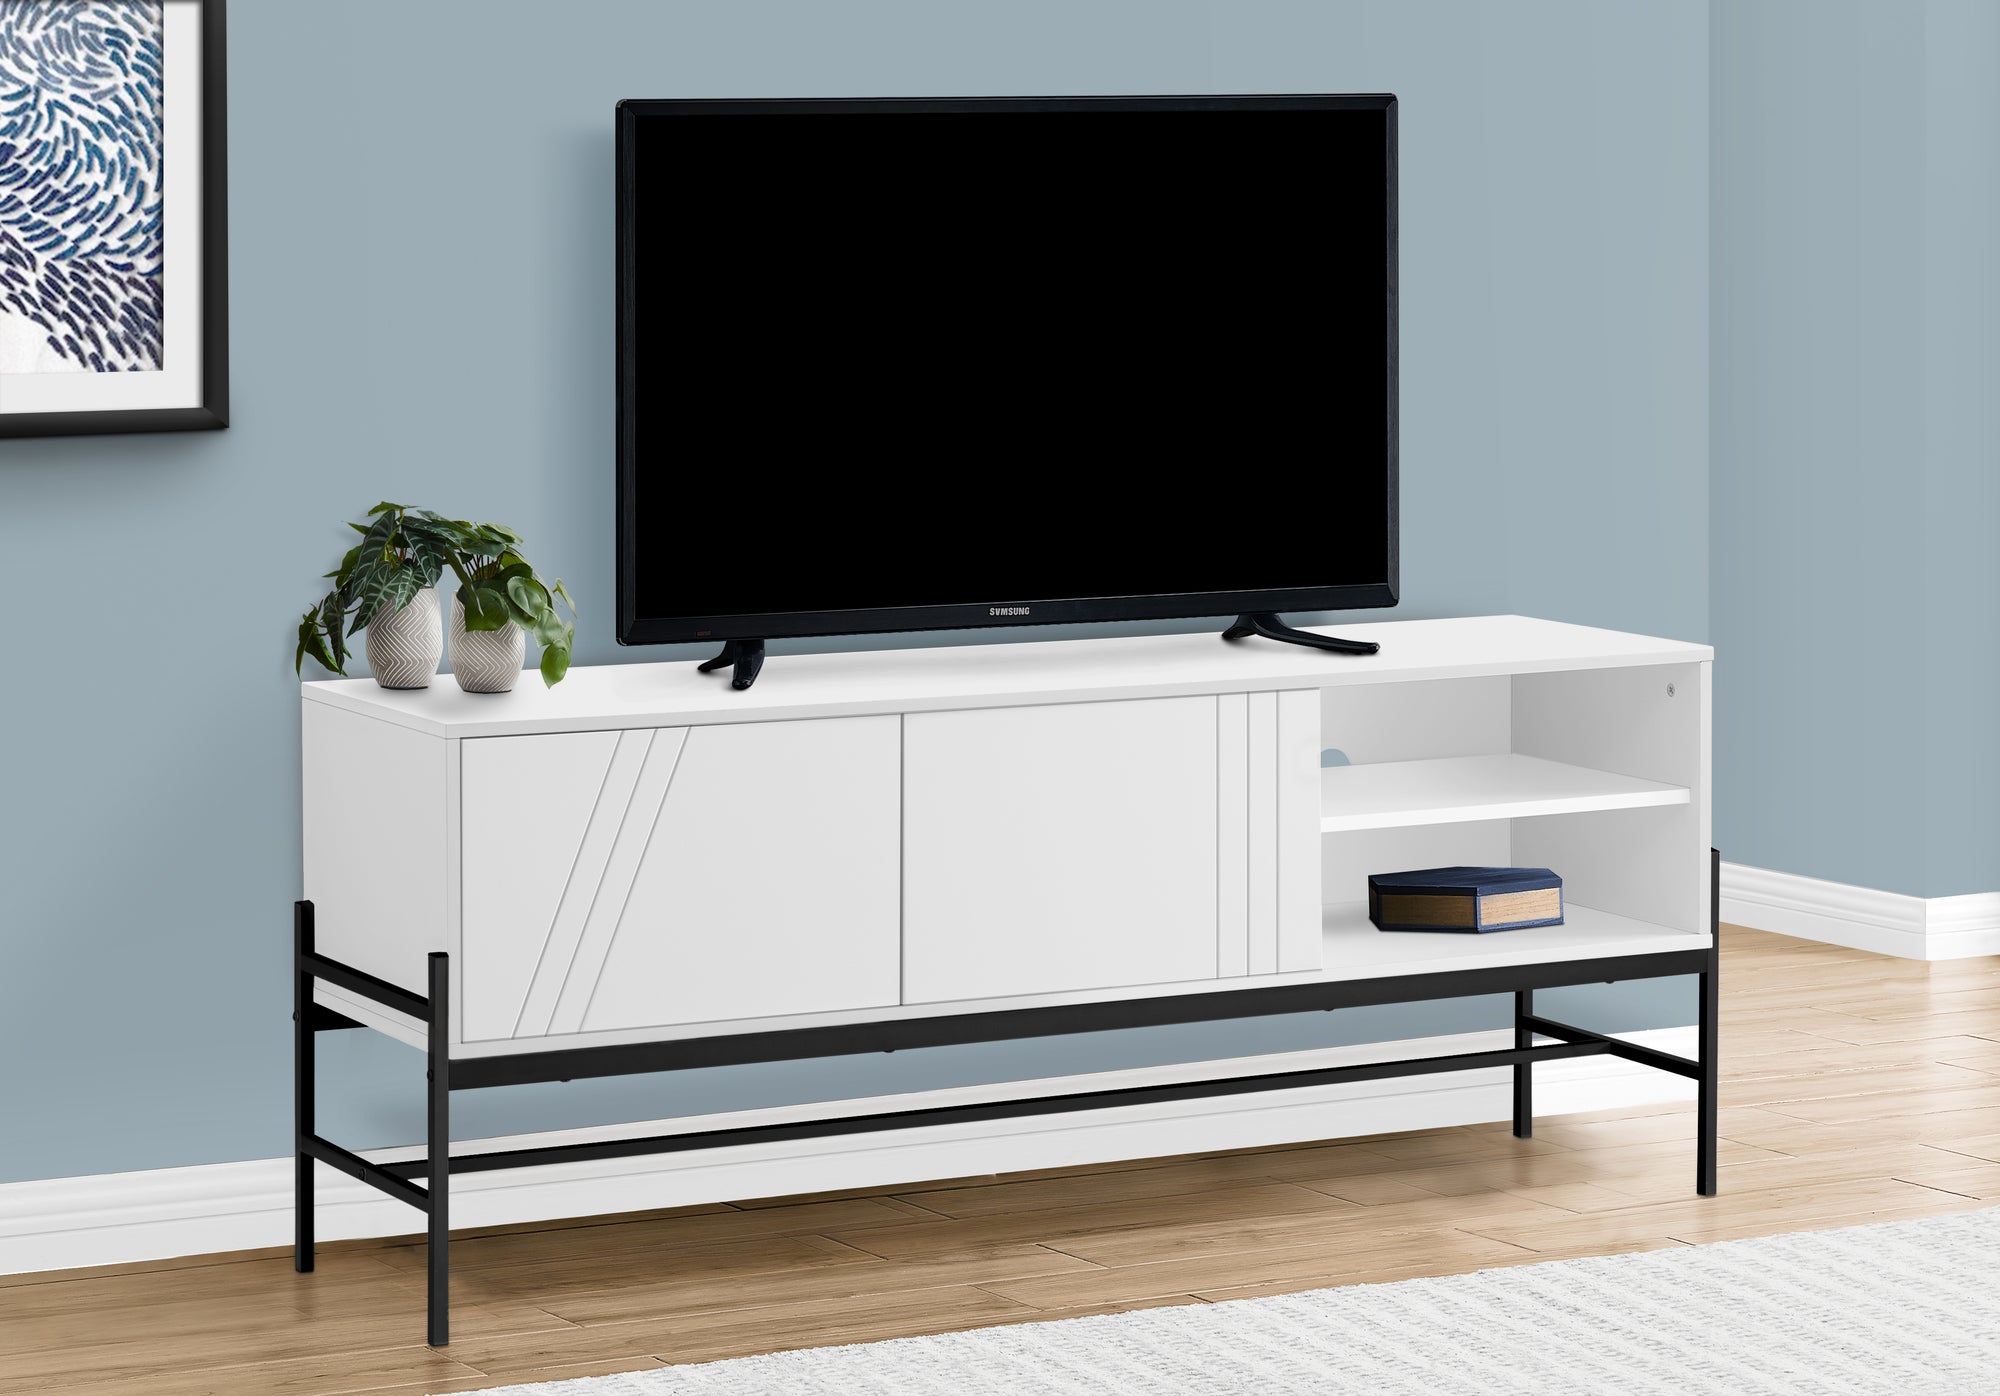 MN-652738    Tv Stand, 60 Inch, Console, Media Entertainment Center, Storage Cabinet, Living Room, Bedroom, White Laminate, Black Metal, Contemporary, Modern